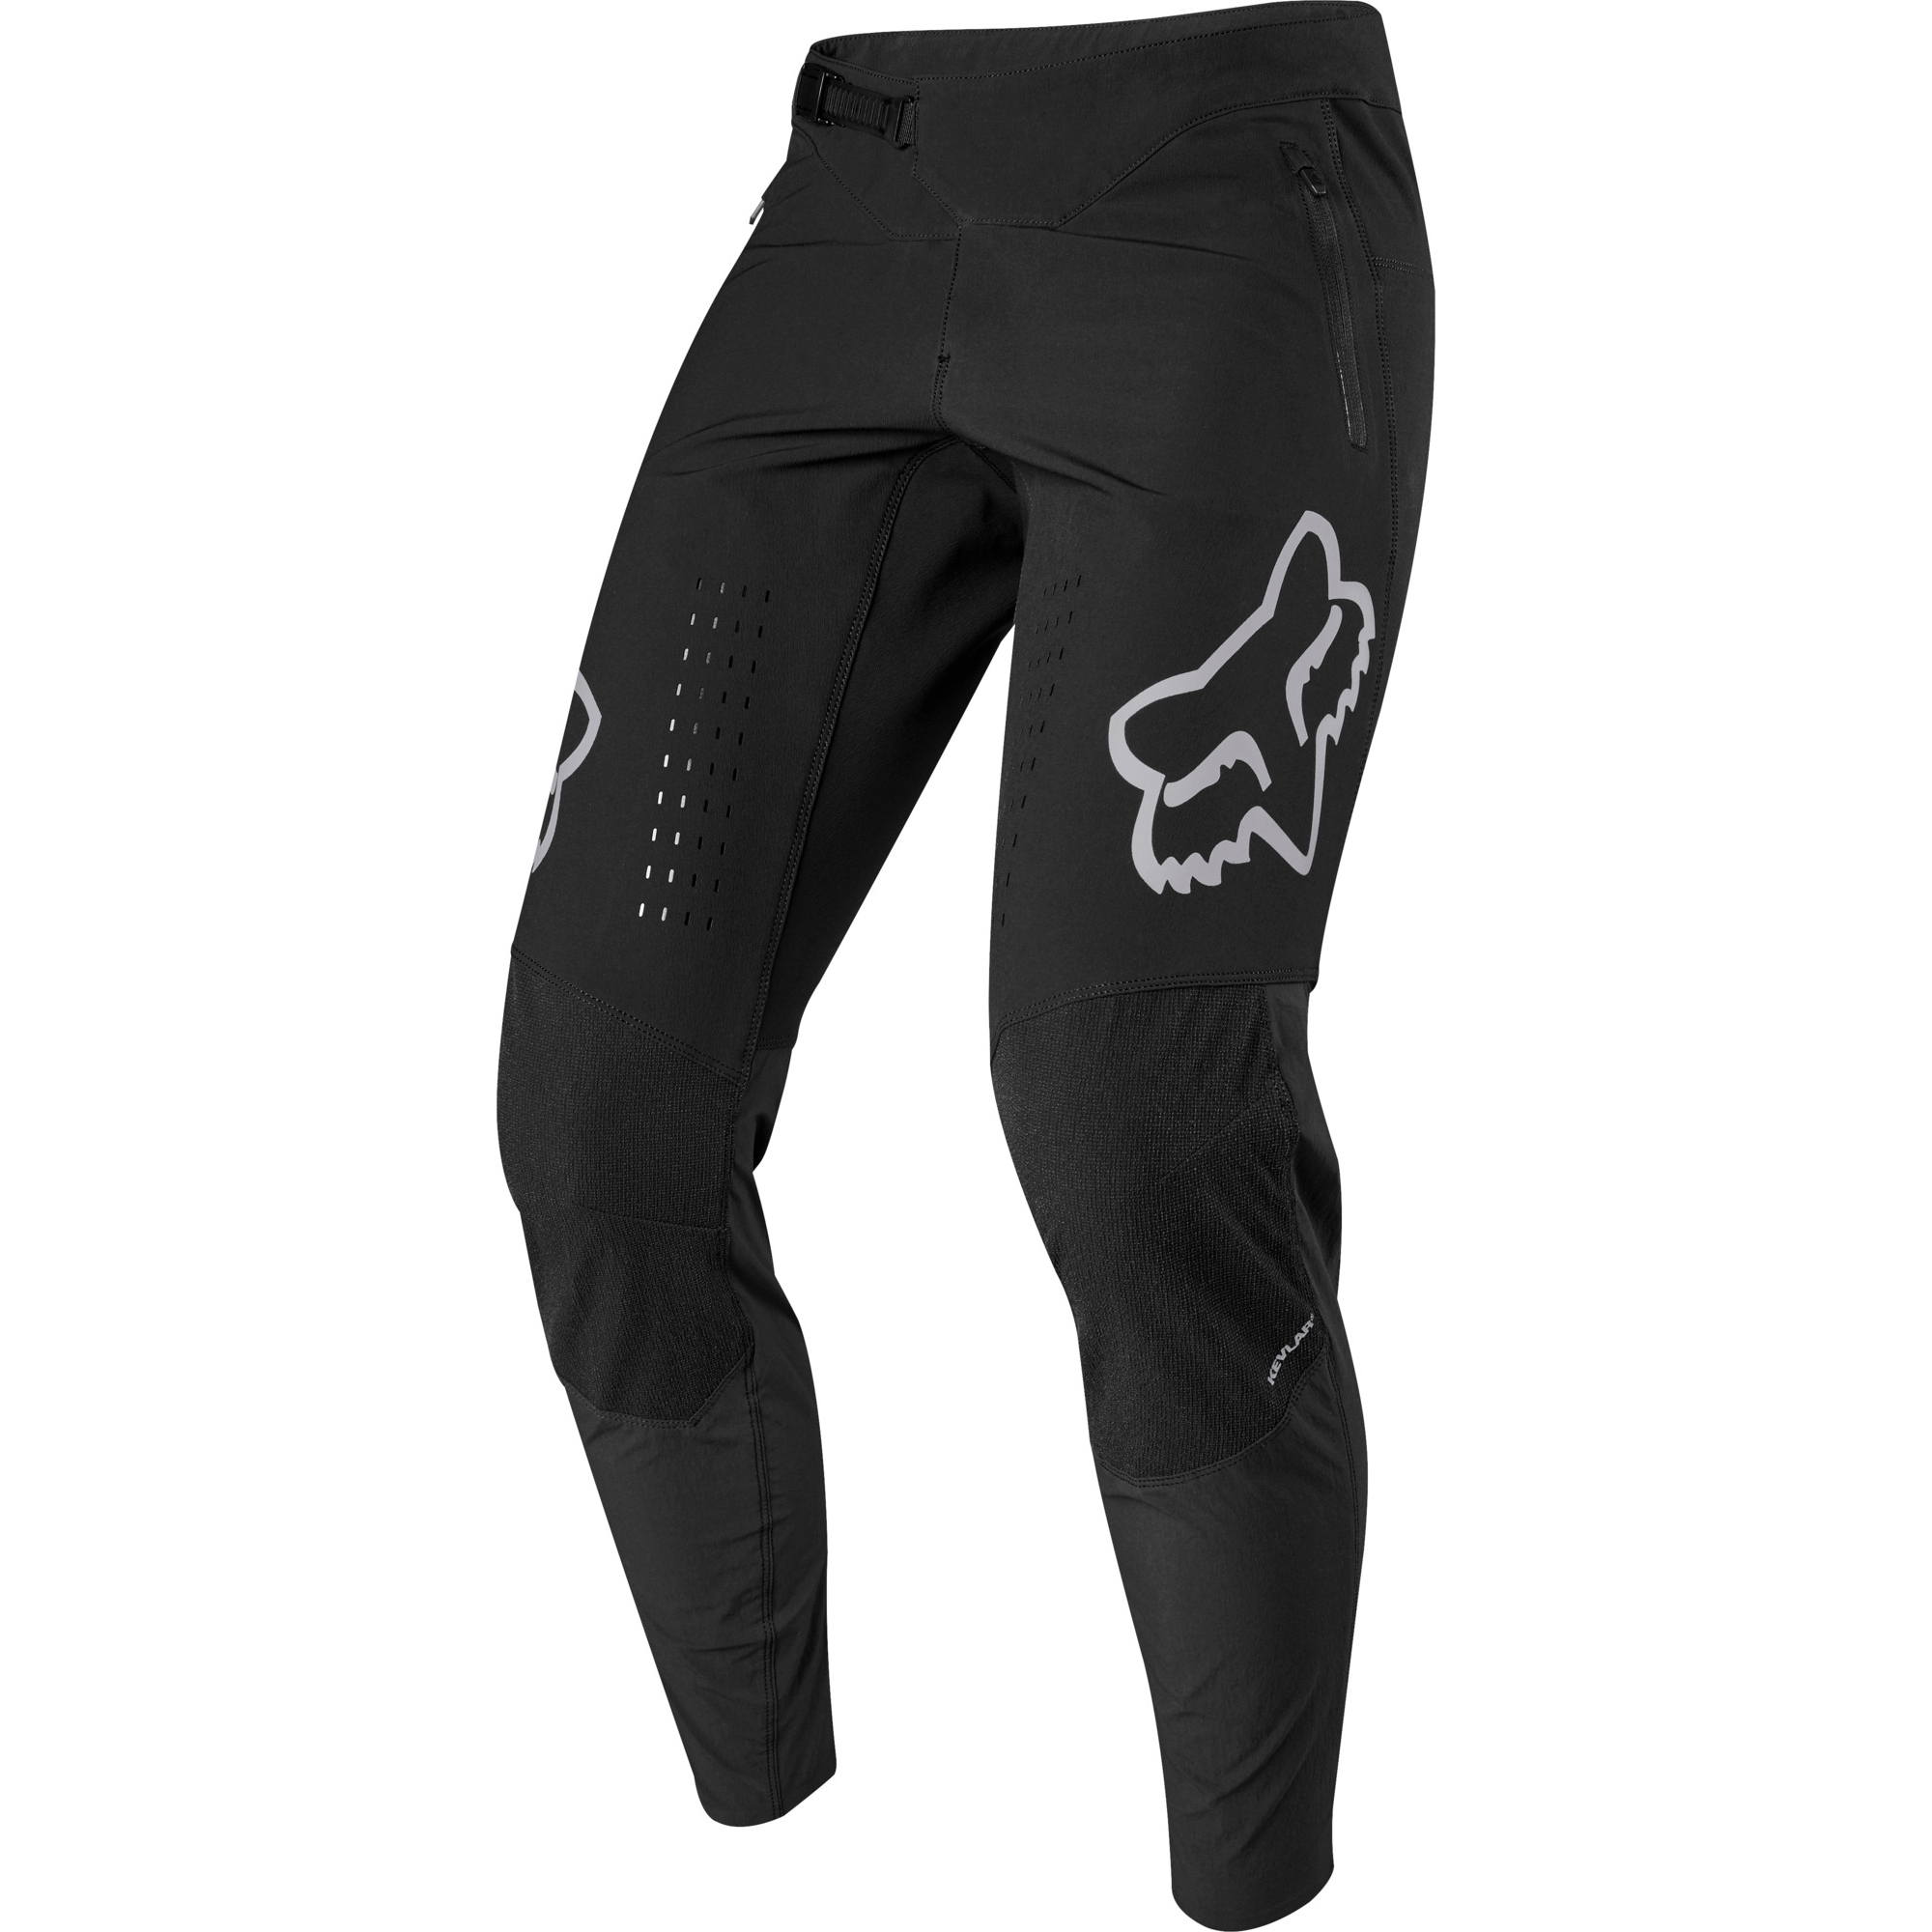 Fox Clothing Defend Water Resistant Mountain Bike MTB Riding Pants Trousers | eBay